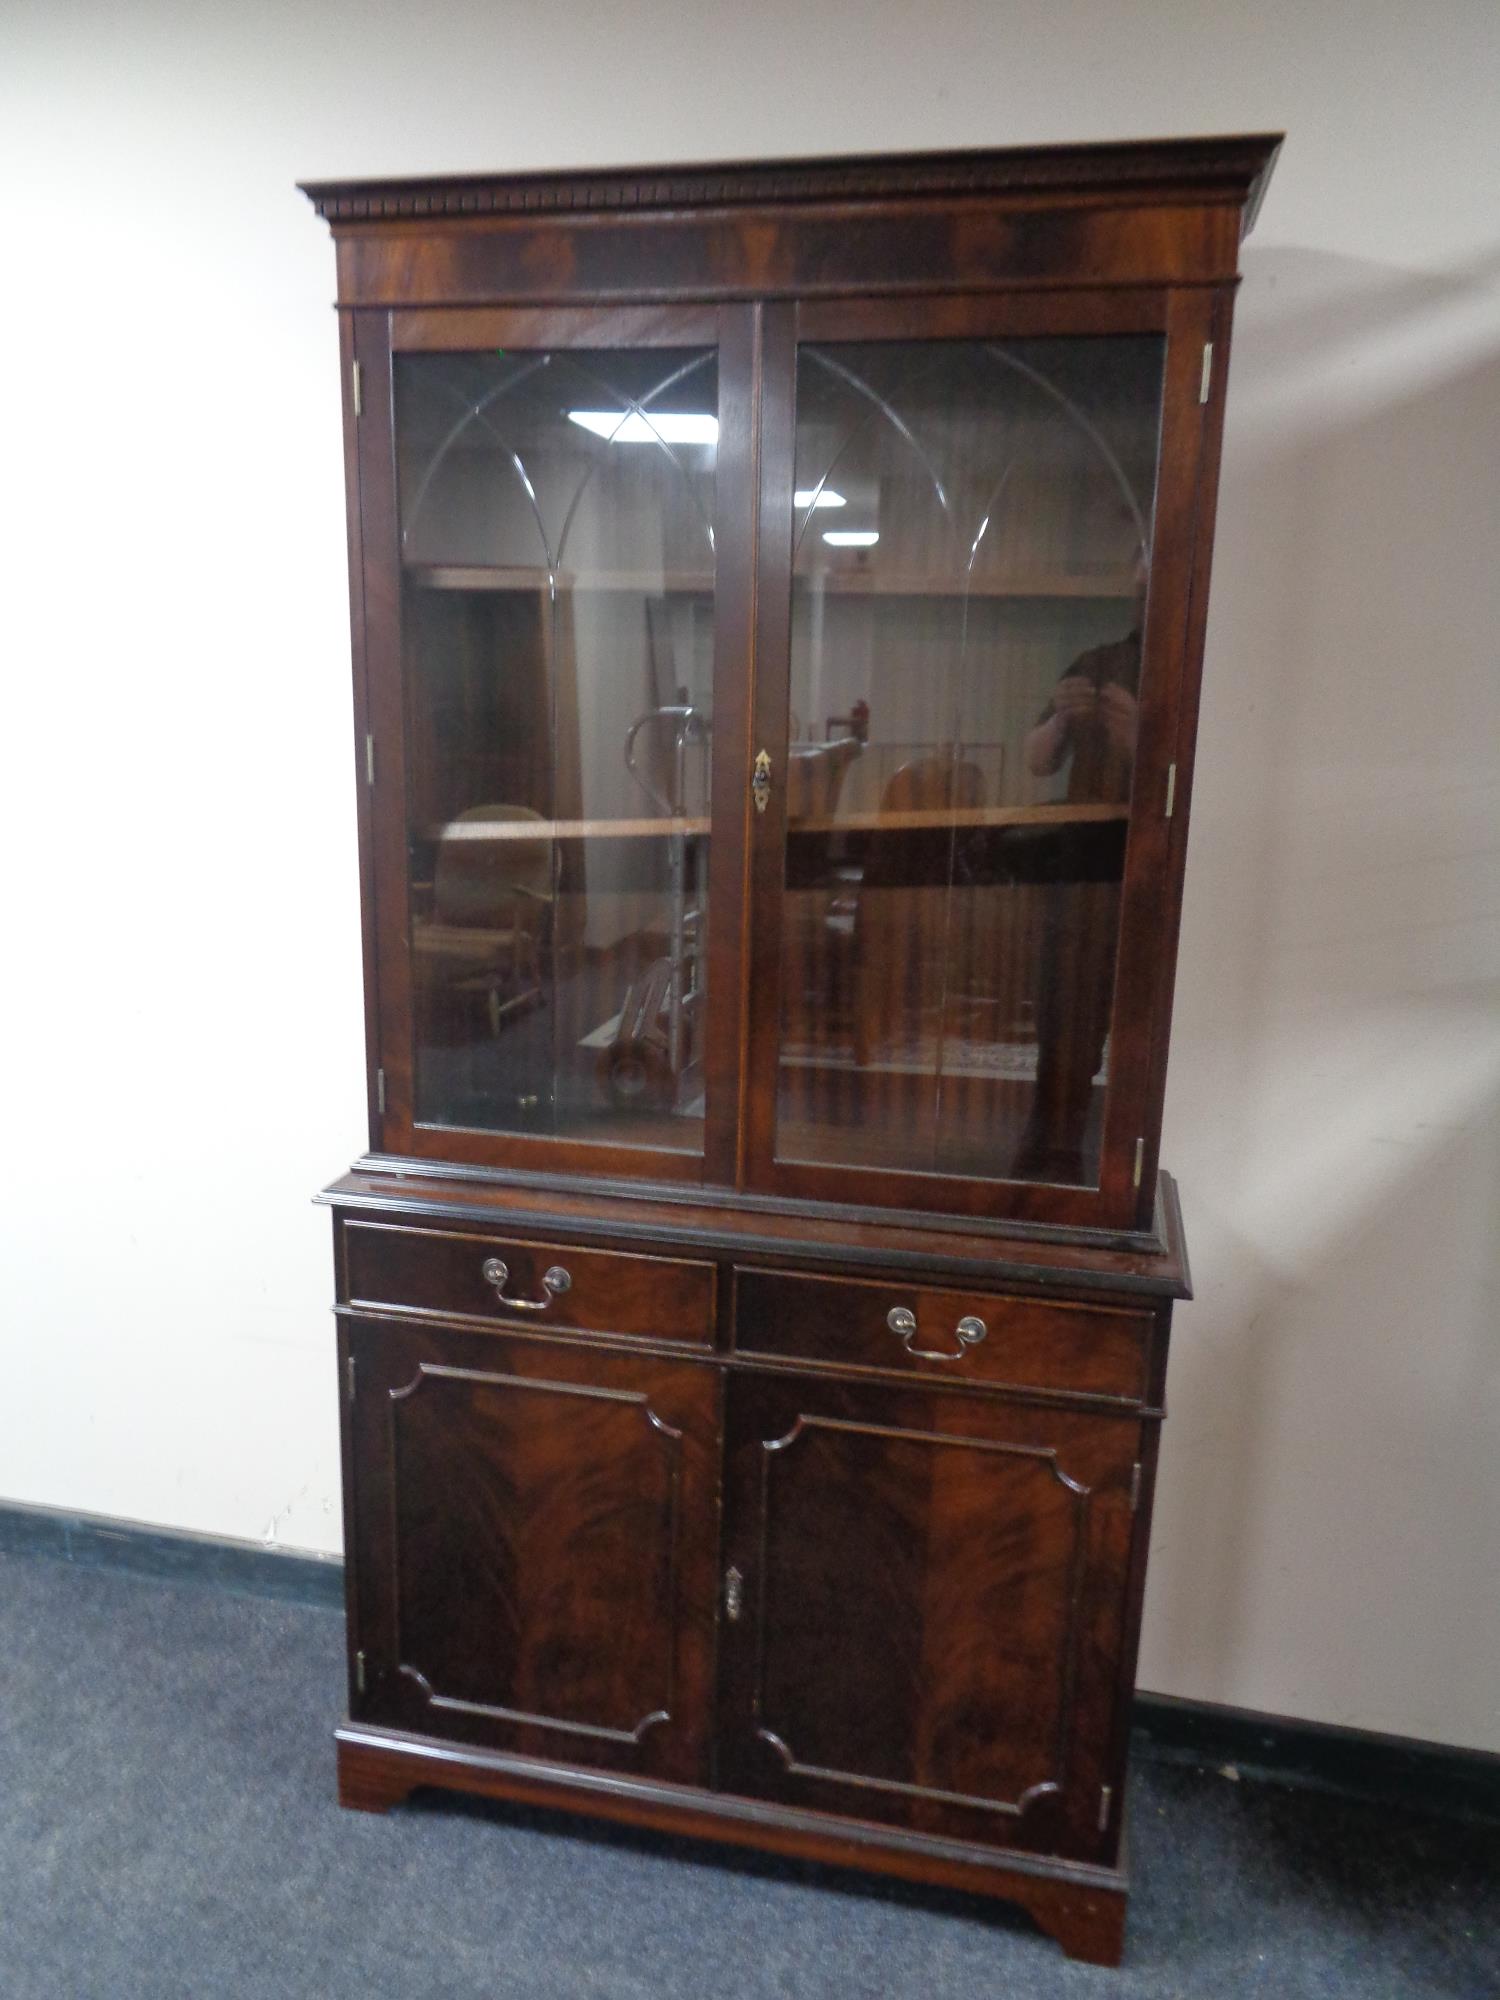 A reproduction mahogany bookcase with cupboards and drawers beneath